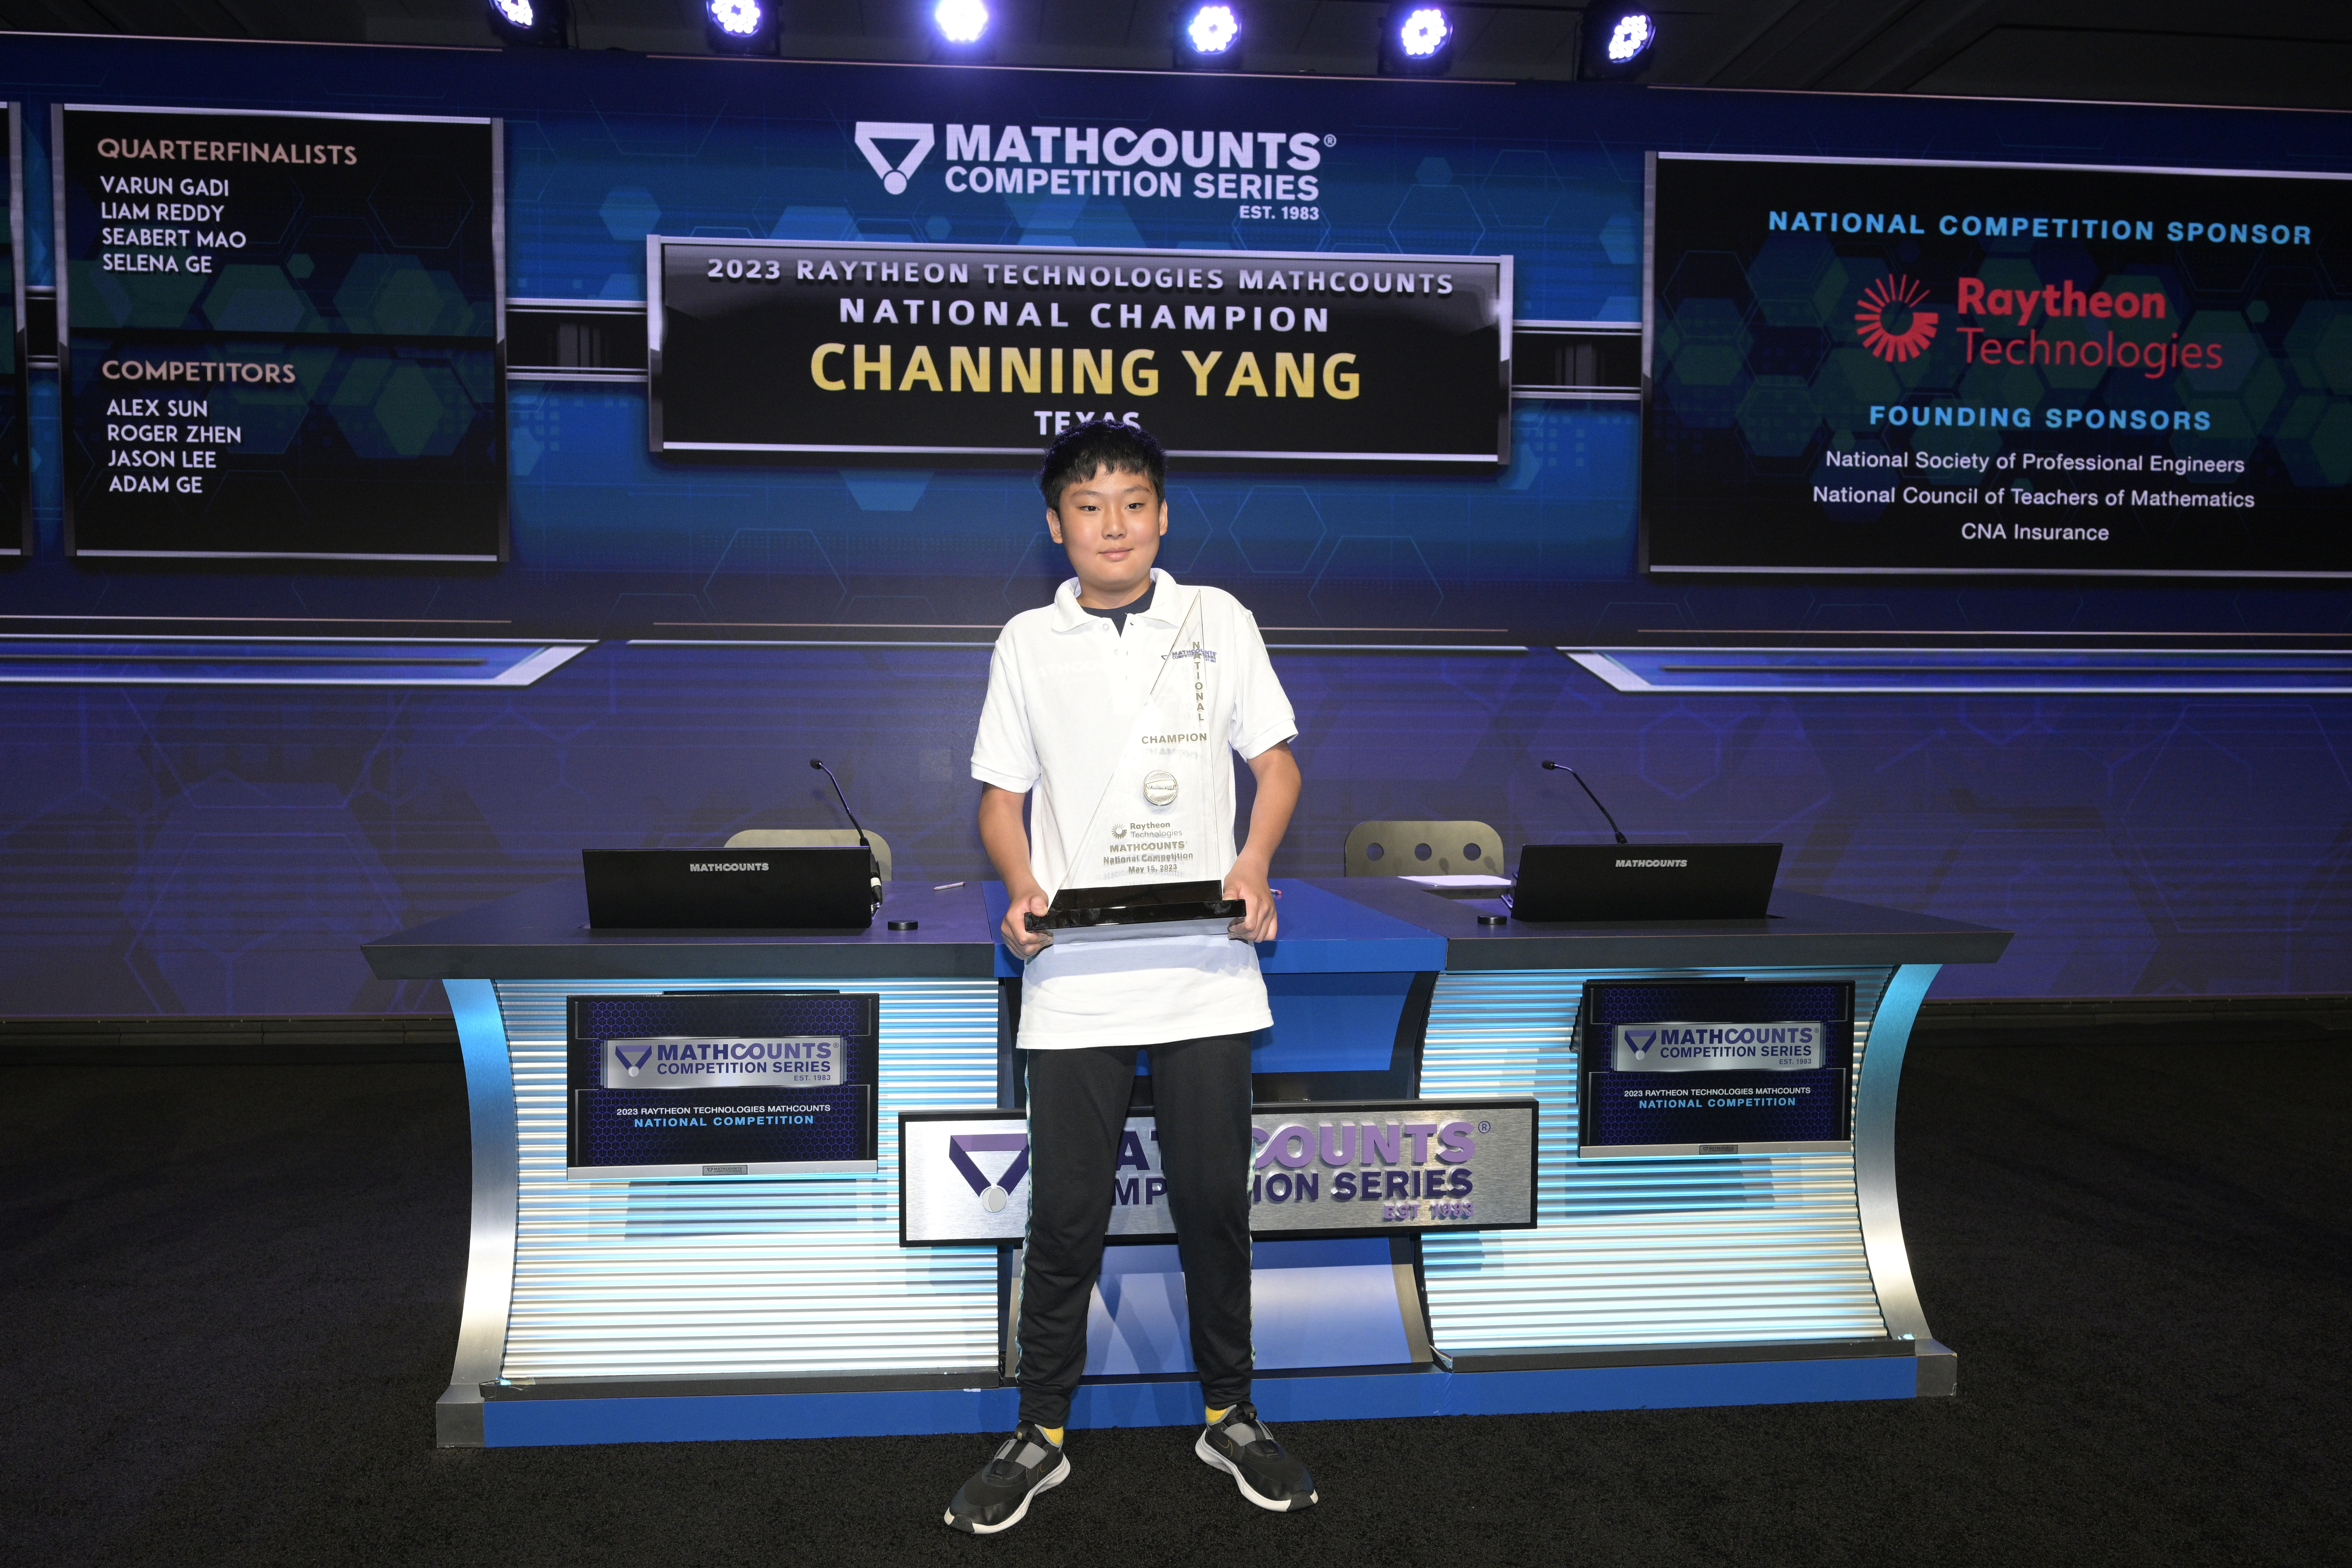 Channing Yang stands with his trophy on the MATHCOUNTS stage